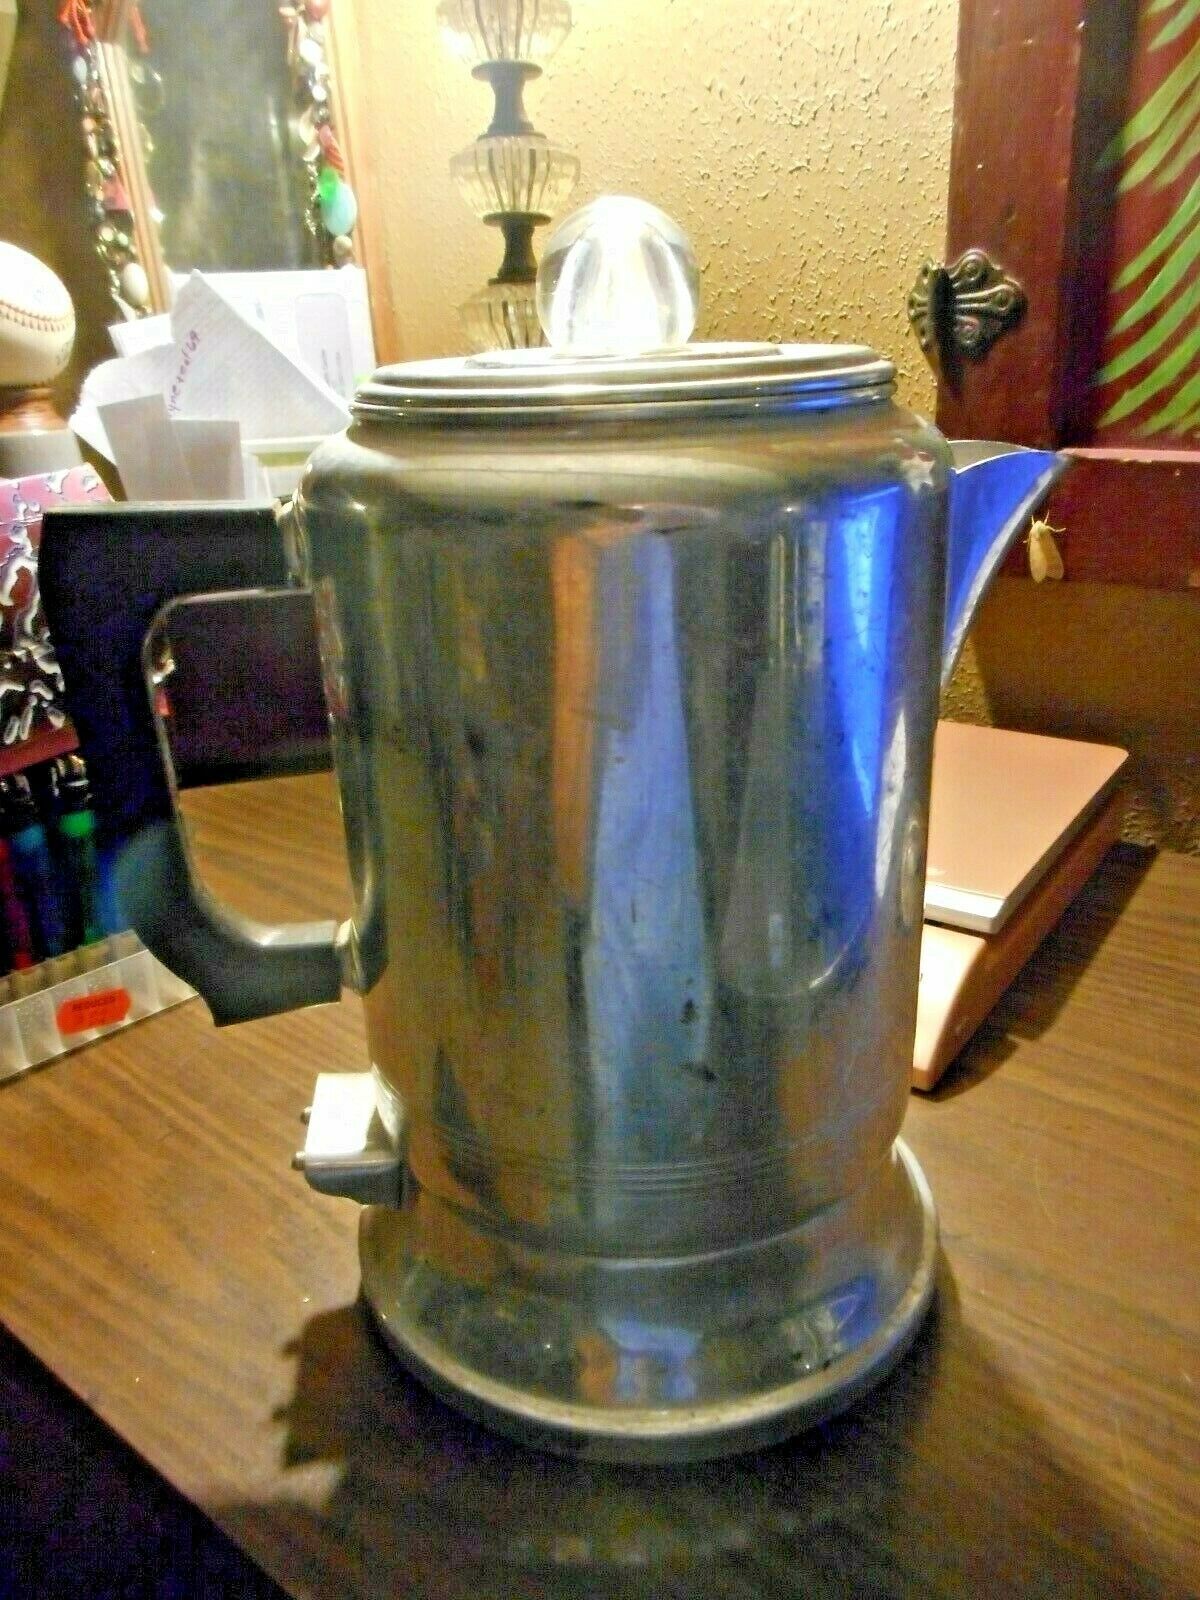 VINTAGE WEAREVER COFFEE POT GLASS PERCOLATOR TOP REPLACEMENT